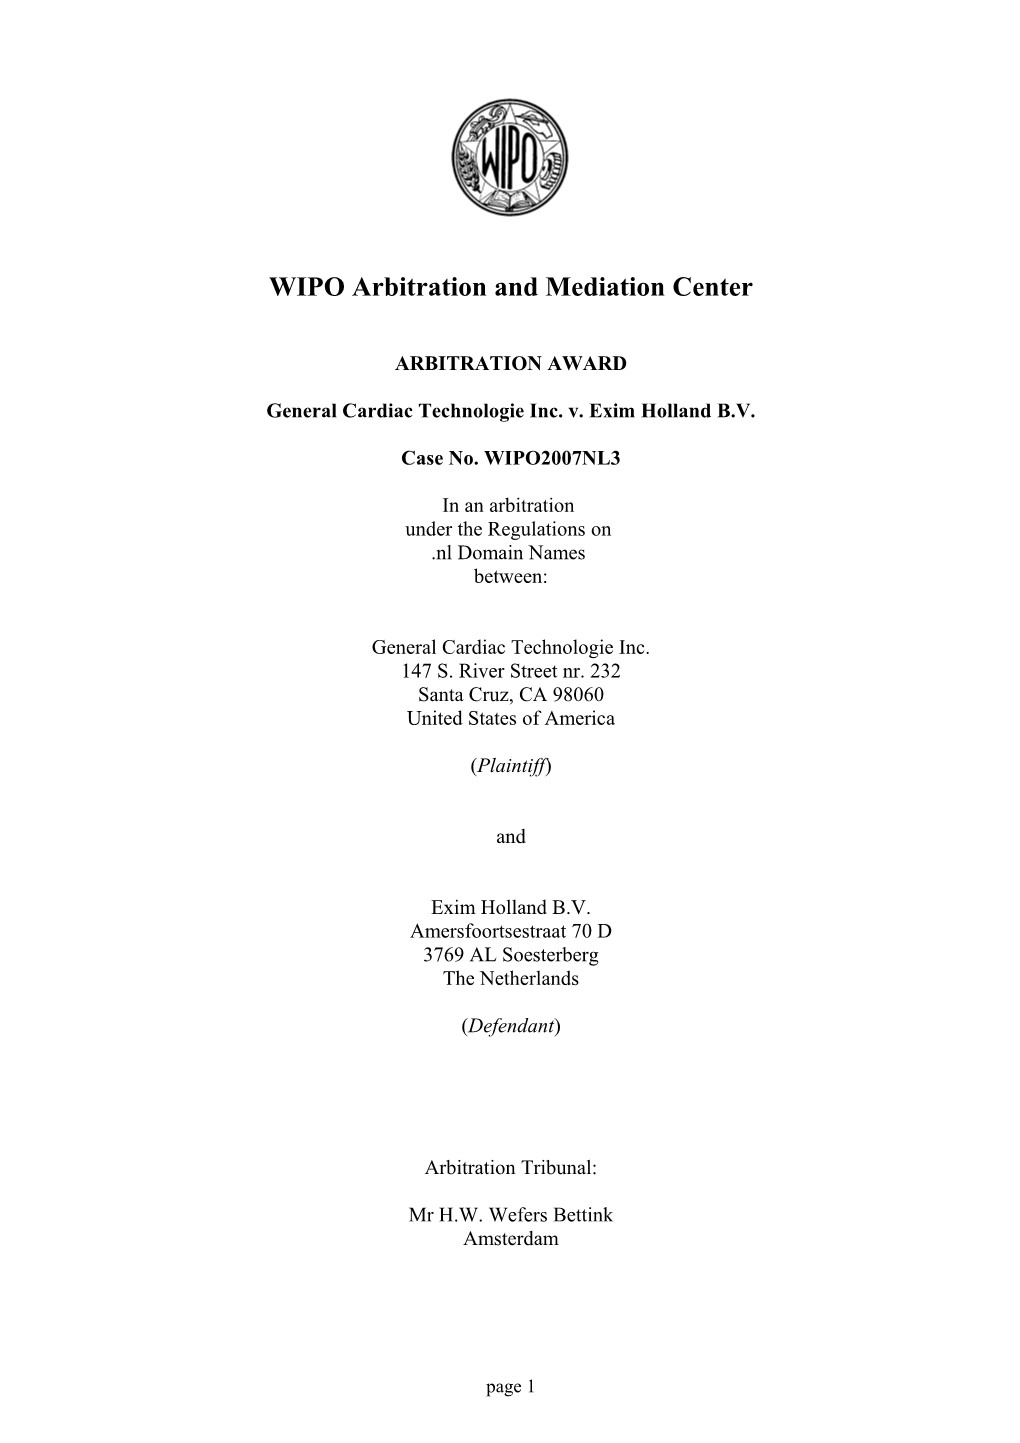 WIPO Arbitration and Mediationcenter